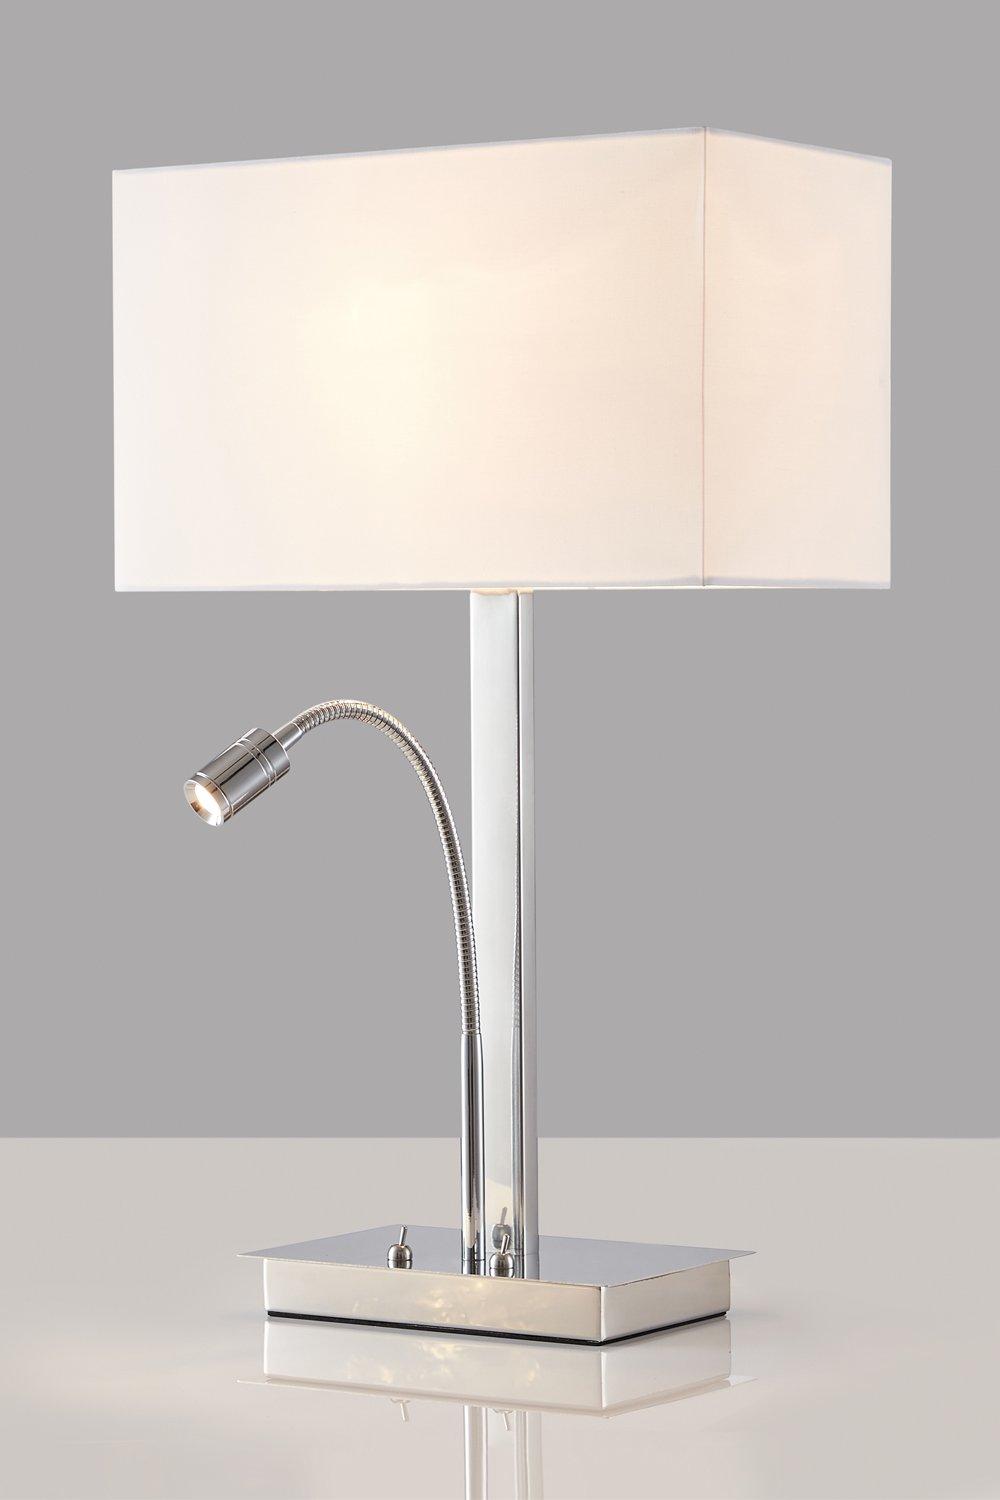 Office Table Lamp with Gooseneck LED Reading Light